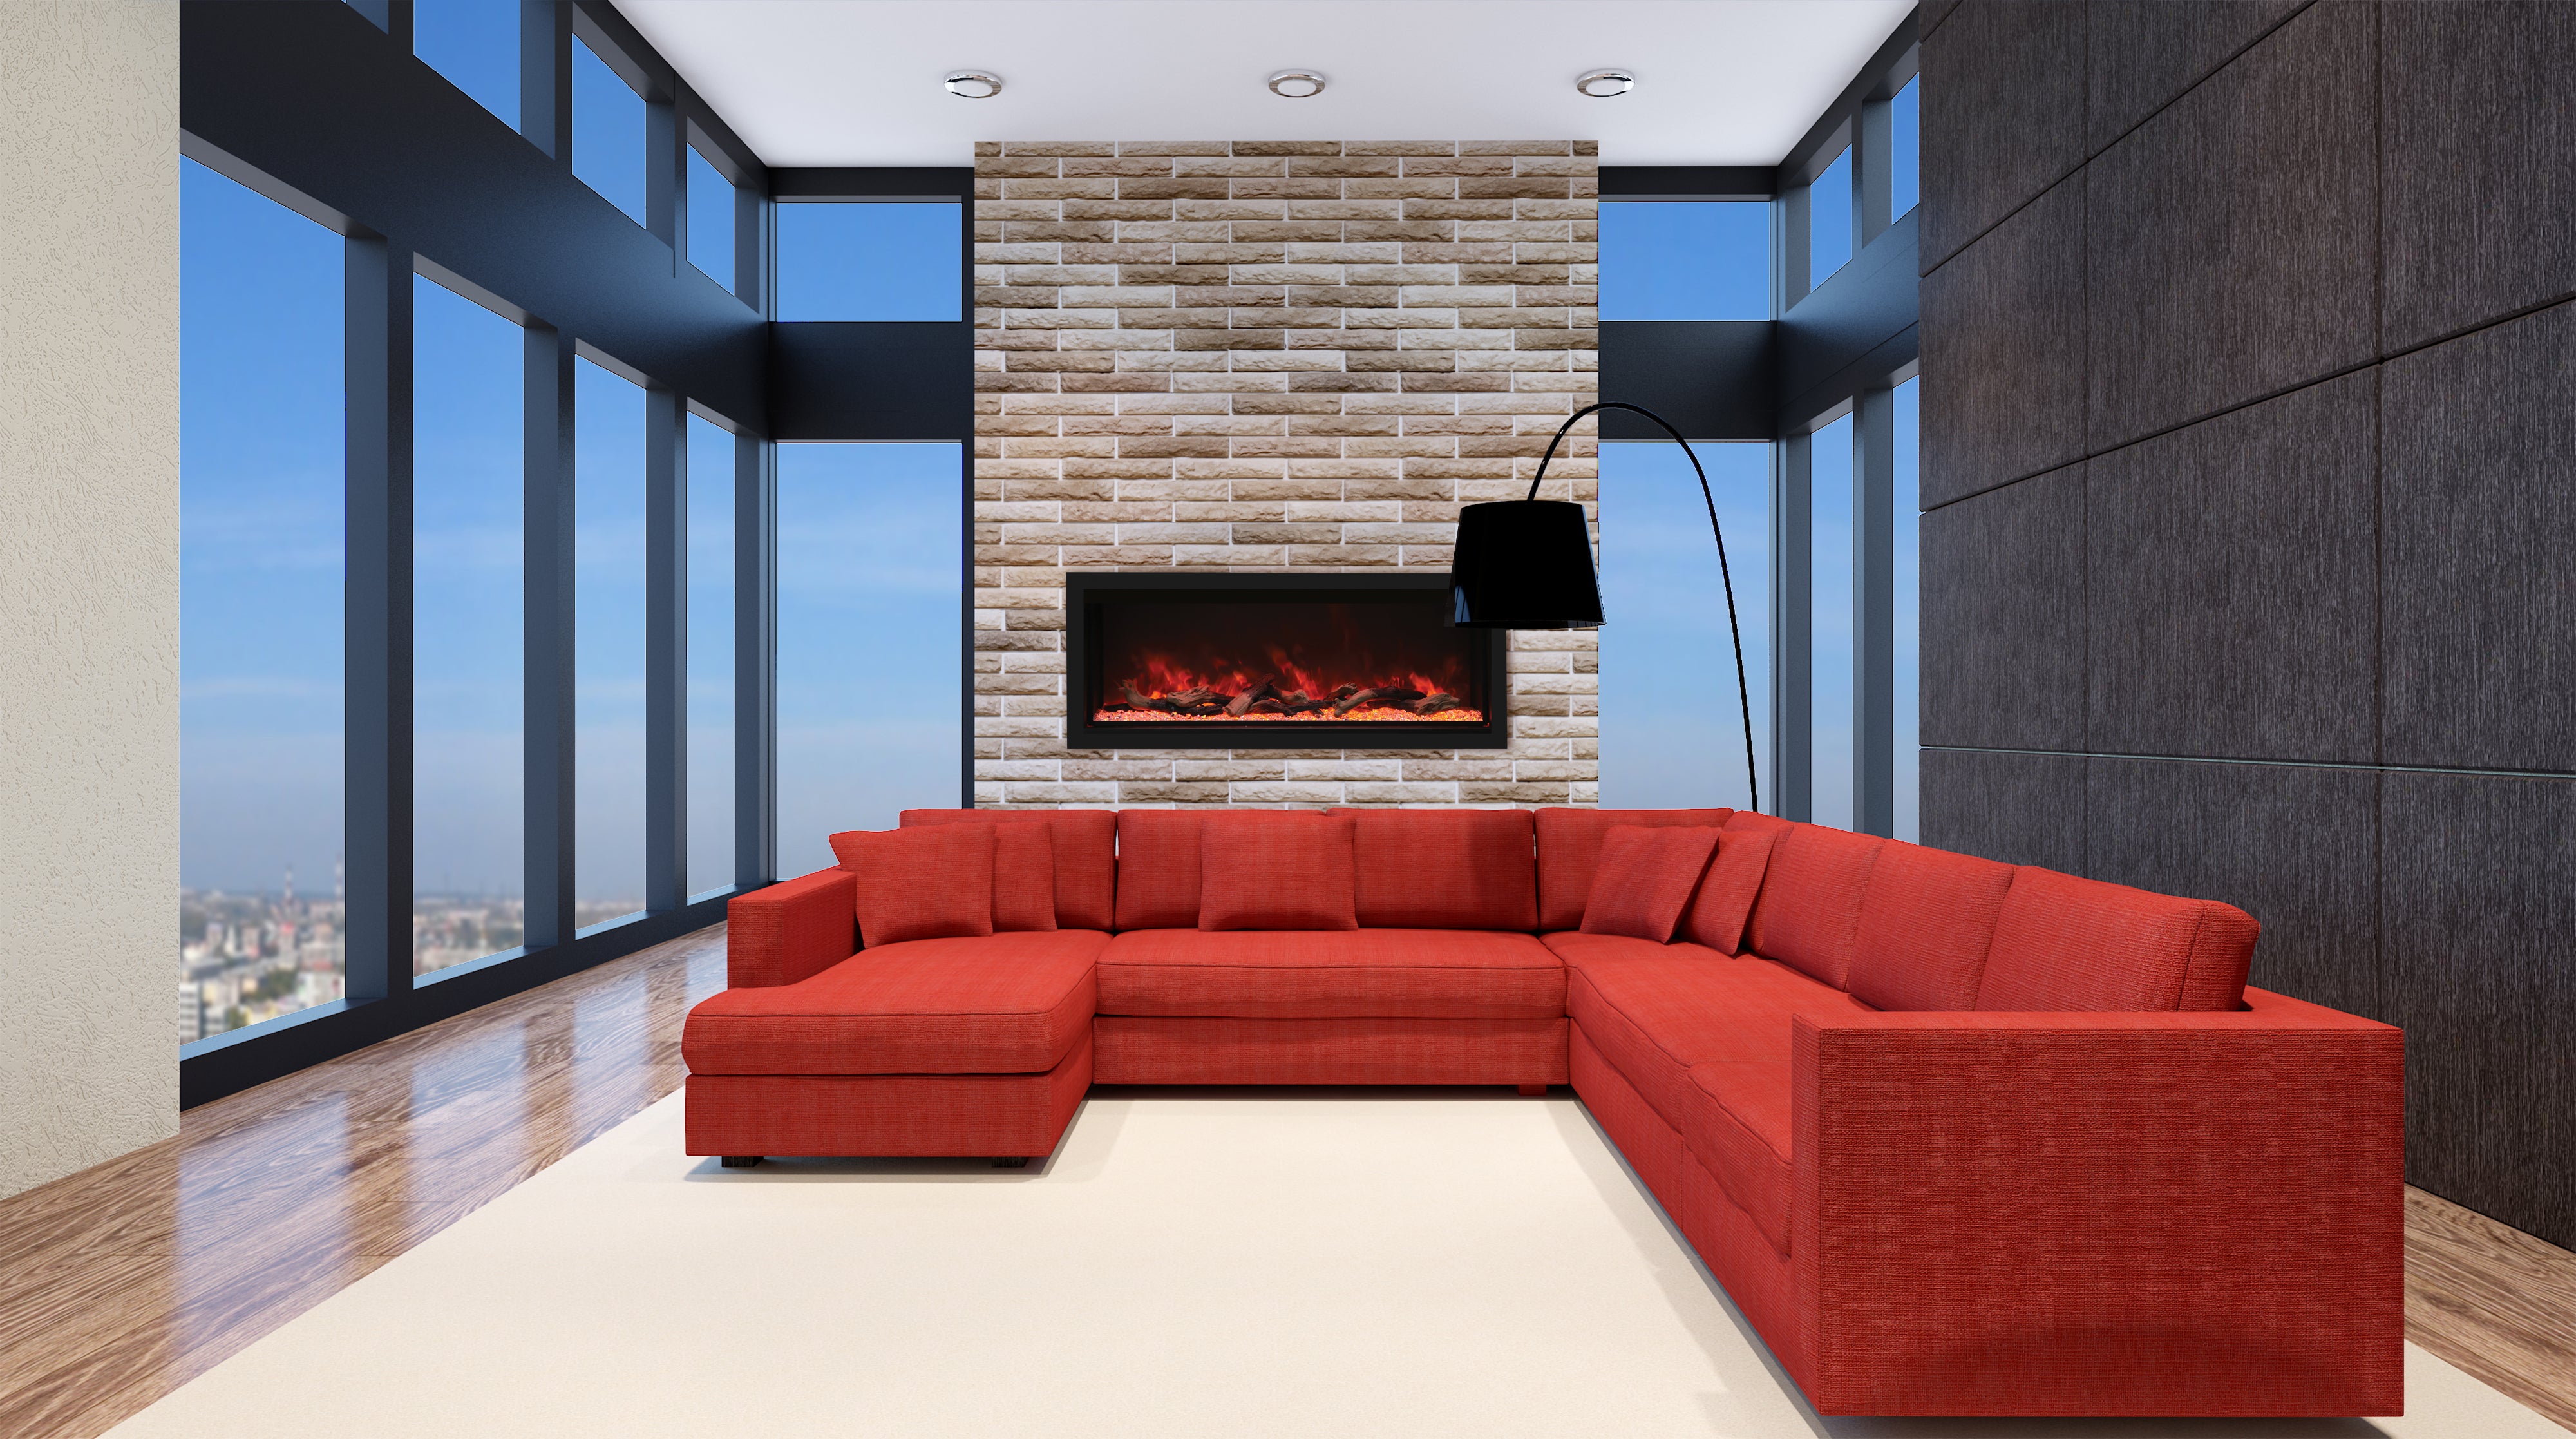 Remii by Amantii - Extra Tall XT Series Built-in Electric Fireplace with Black Steel Surround - Lifestyle Brick Wall